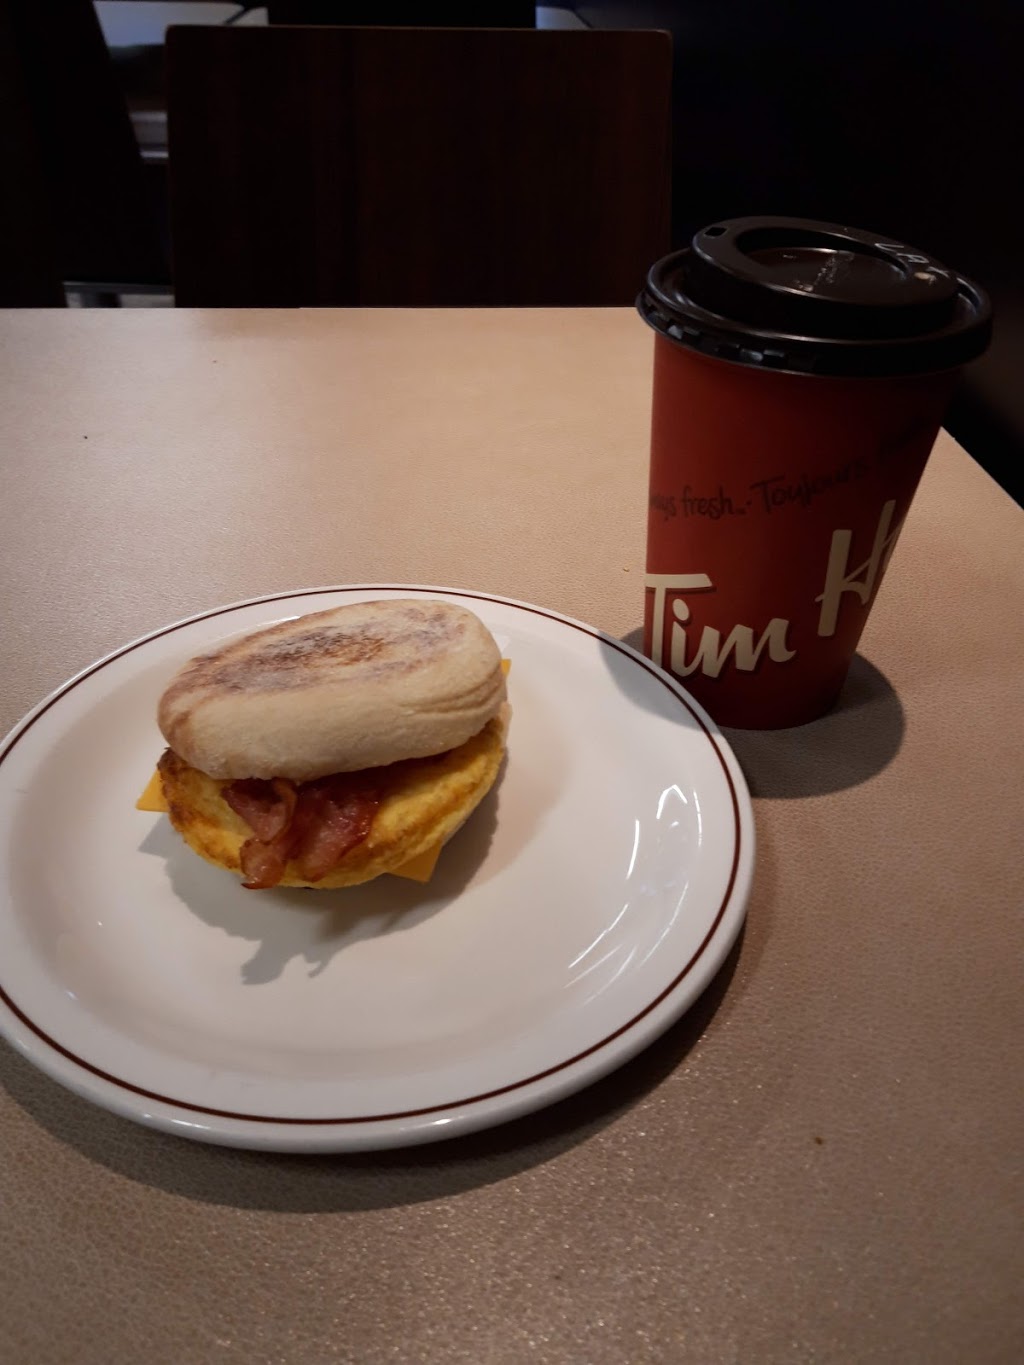 Tim Hortons | cafe | 235 Water St, St. Johns, NL A1C 1B6, Canada | 7095792803 OR +1 709-579-2803